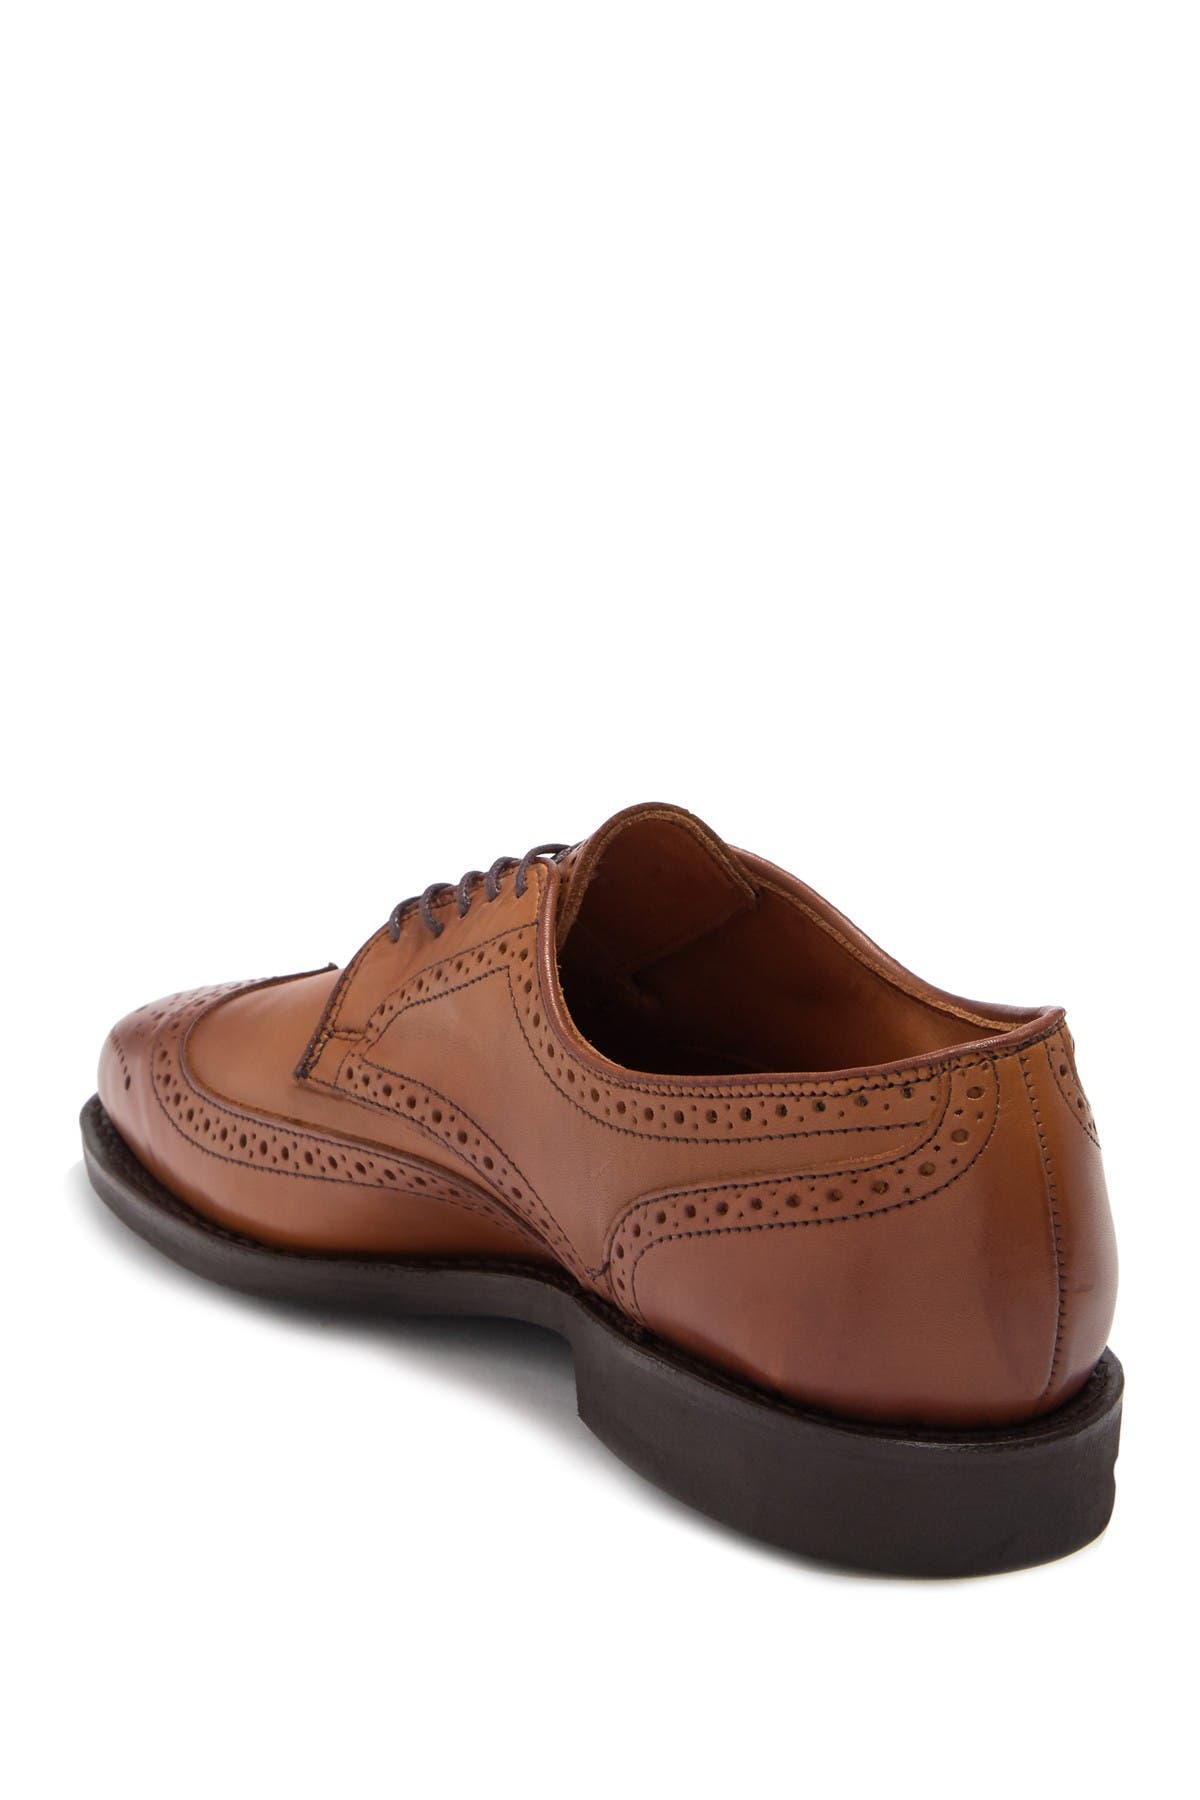 extra wide wingtip shoes